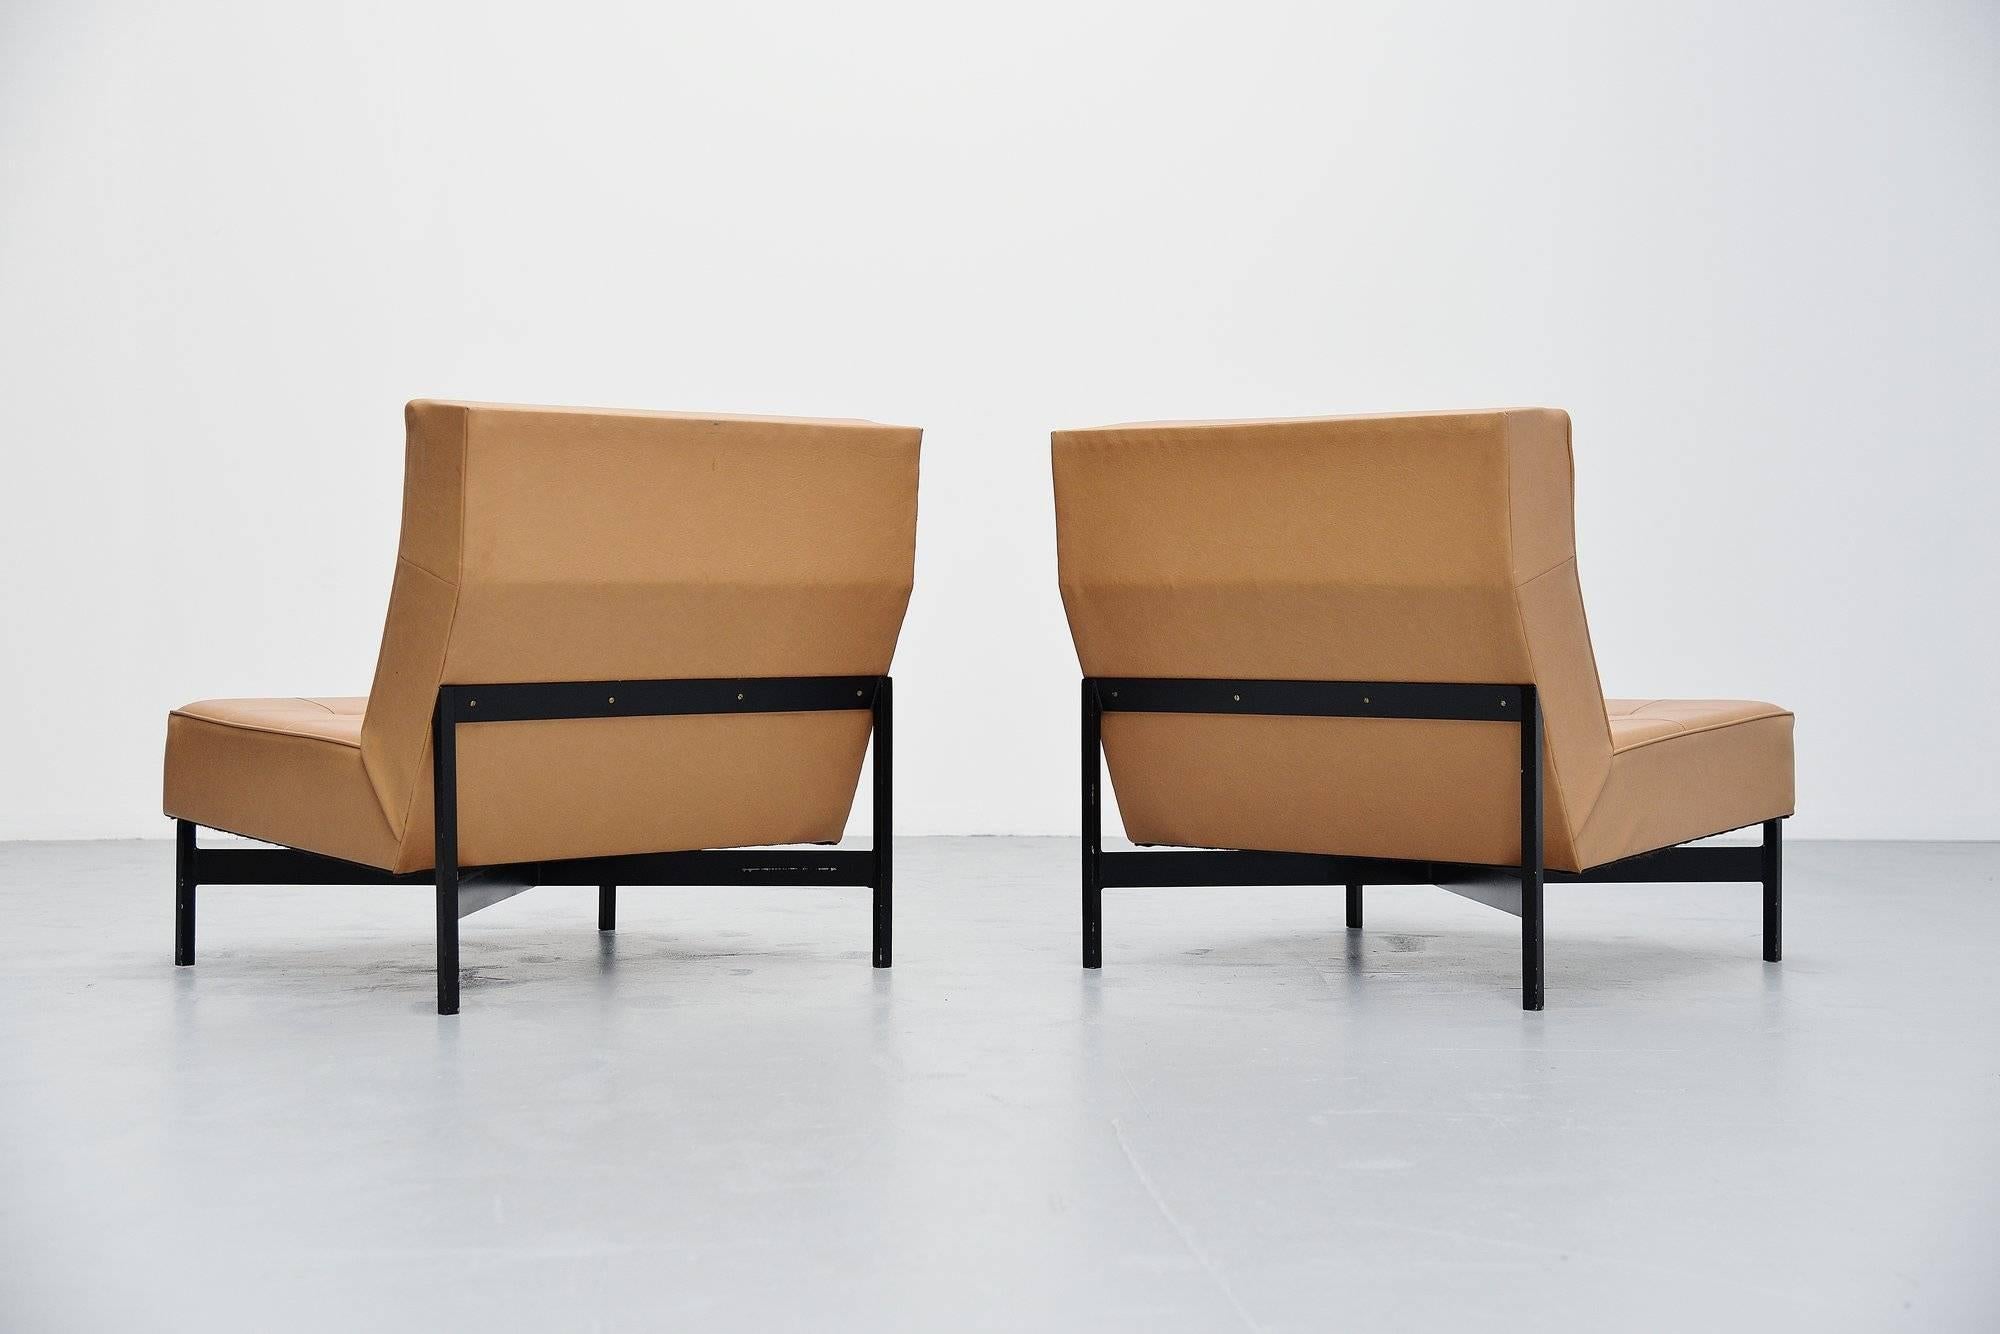 Cold-Painted Wim Den Boon Modernist Lounge Chairs, Holland, 1965